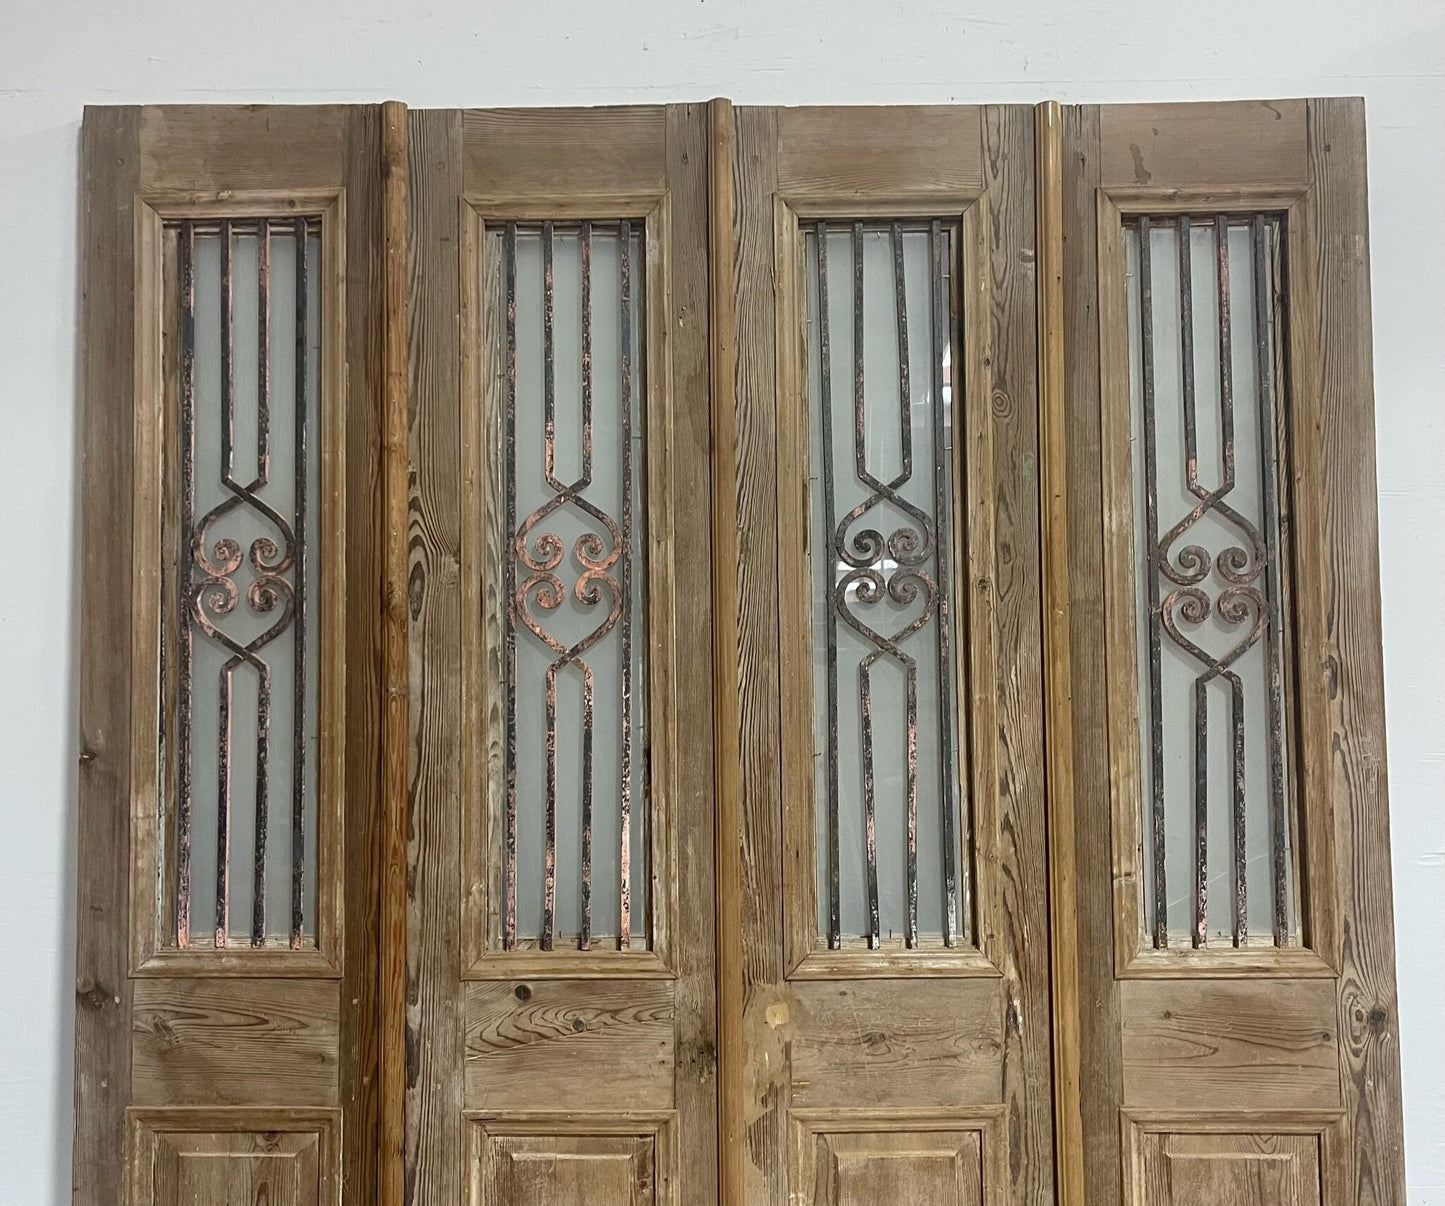 Antique French doors (94.5x76.25) with metal G1276